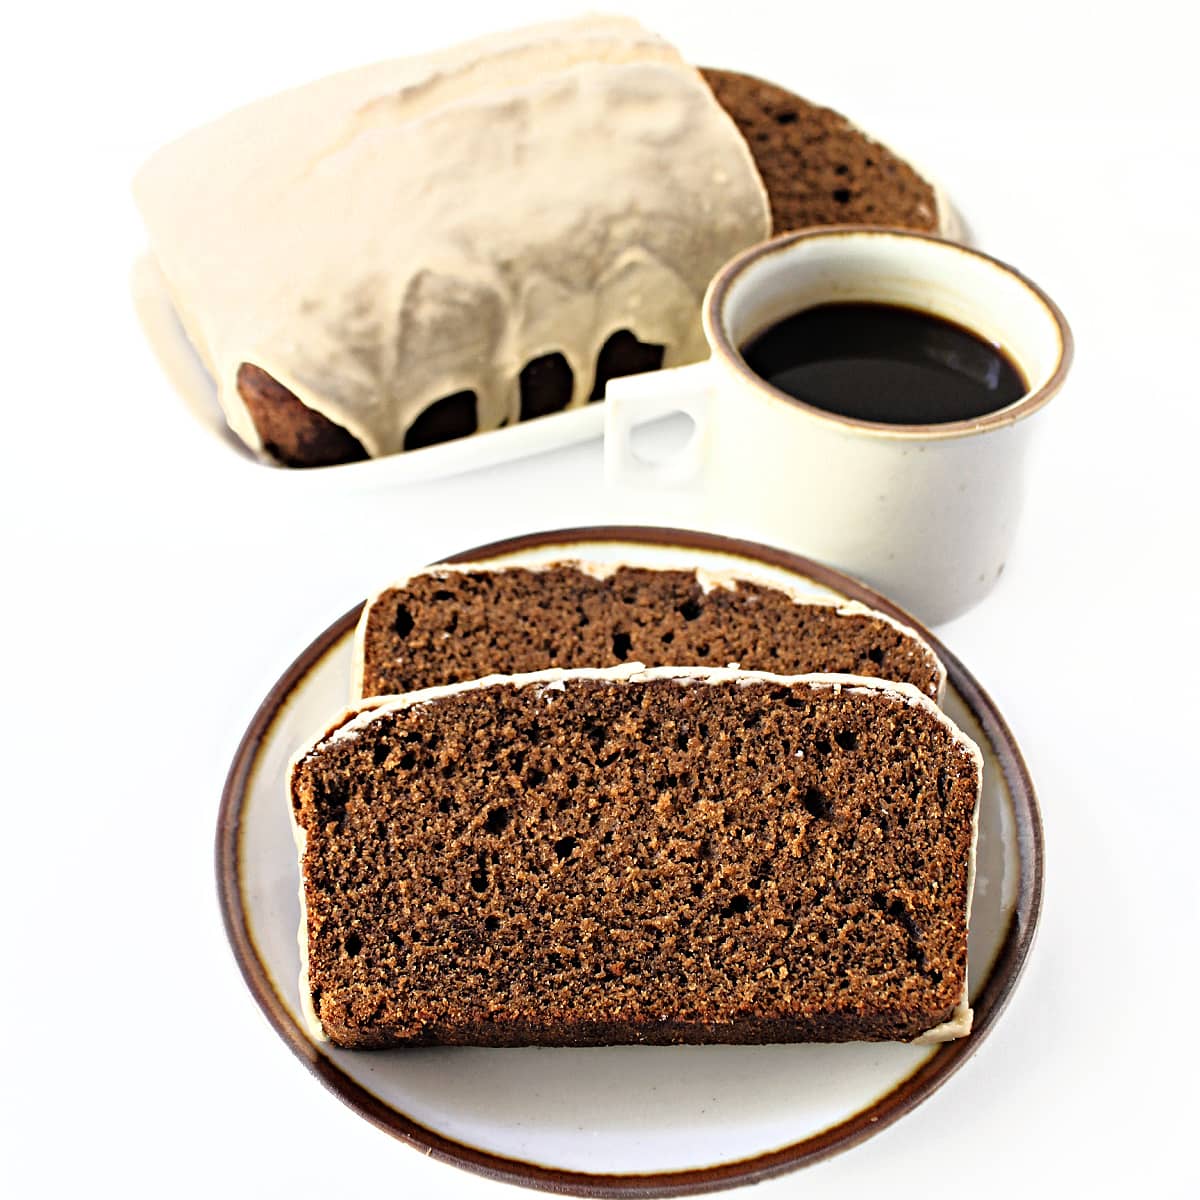 Sliced loaf cake with loaf and coffee mug in the background.